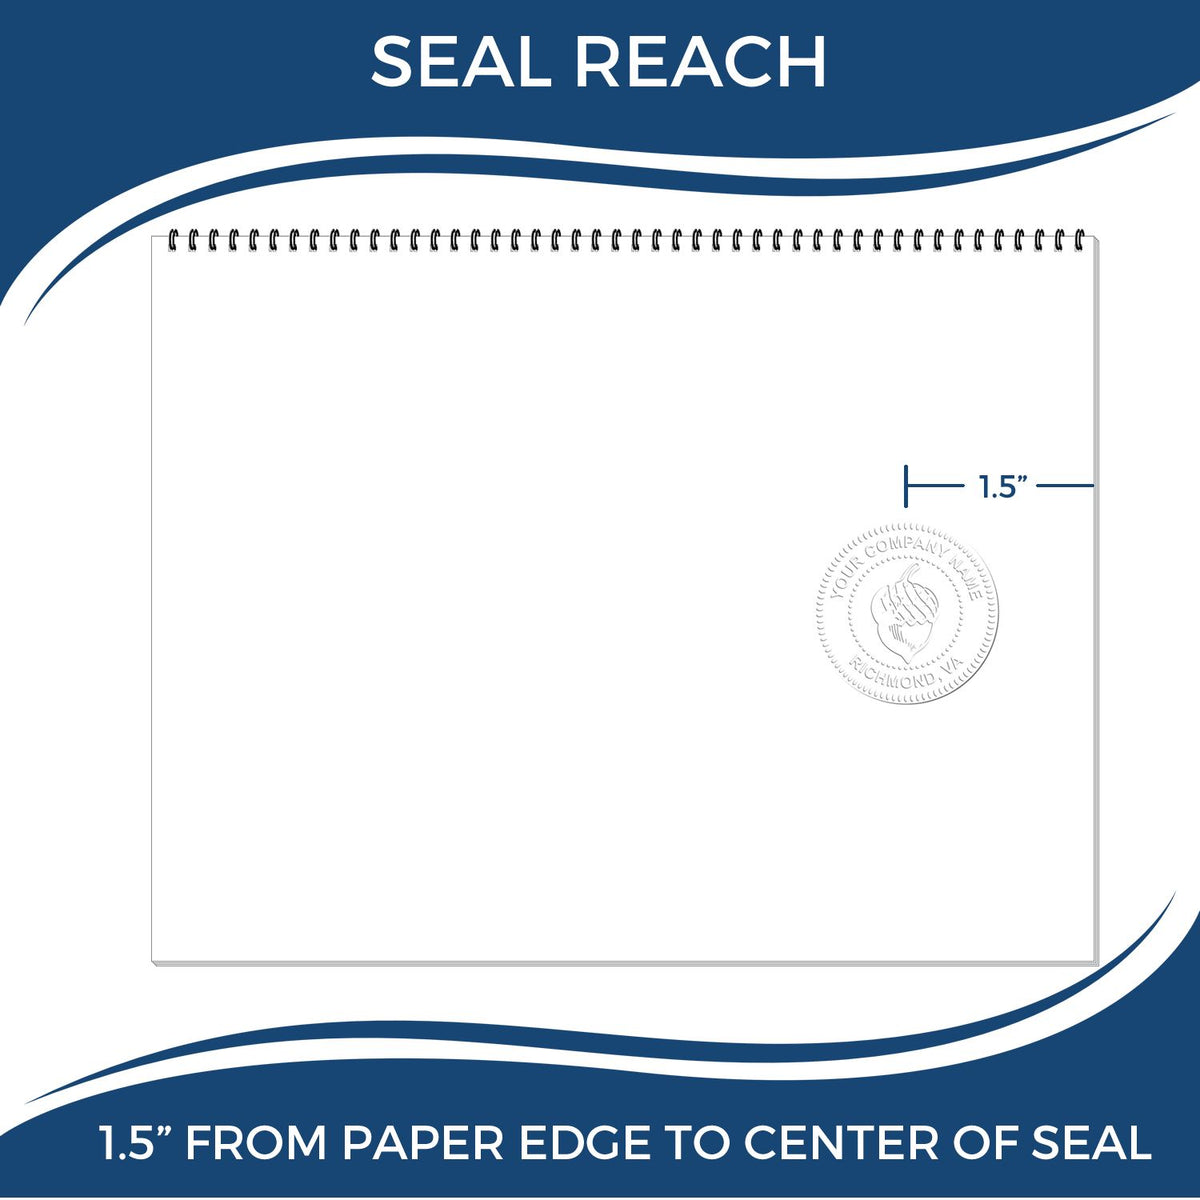 An infographic showing the seal reach which is represented by a ruler and a miniature seal image of the Gift Guam Geologist Seal